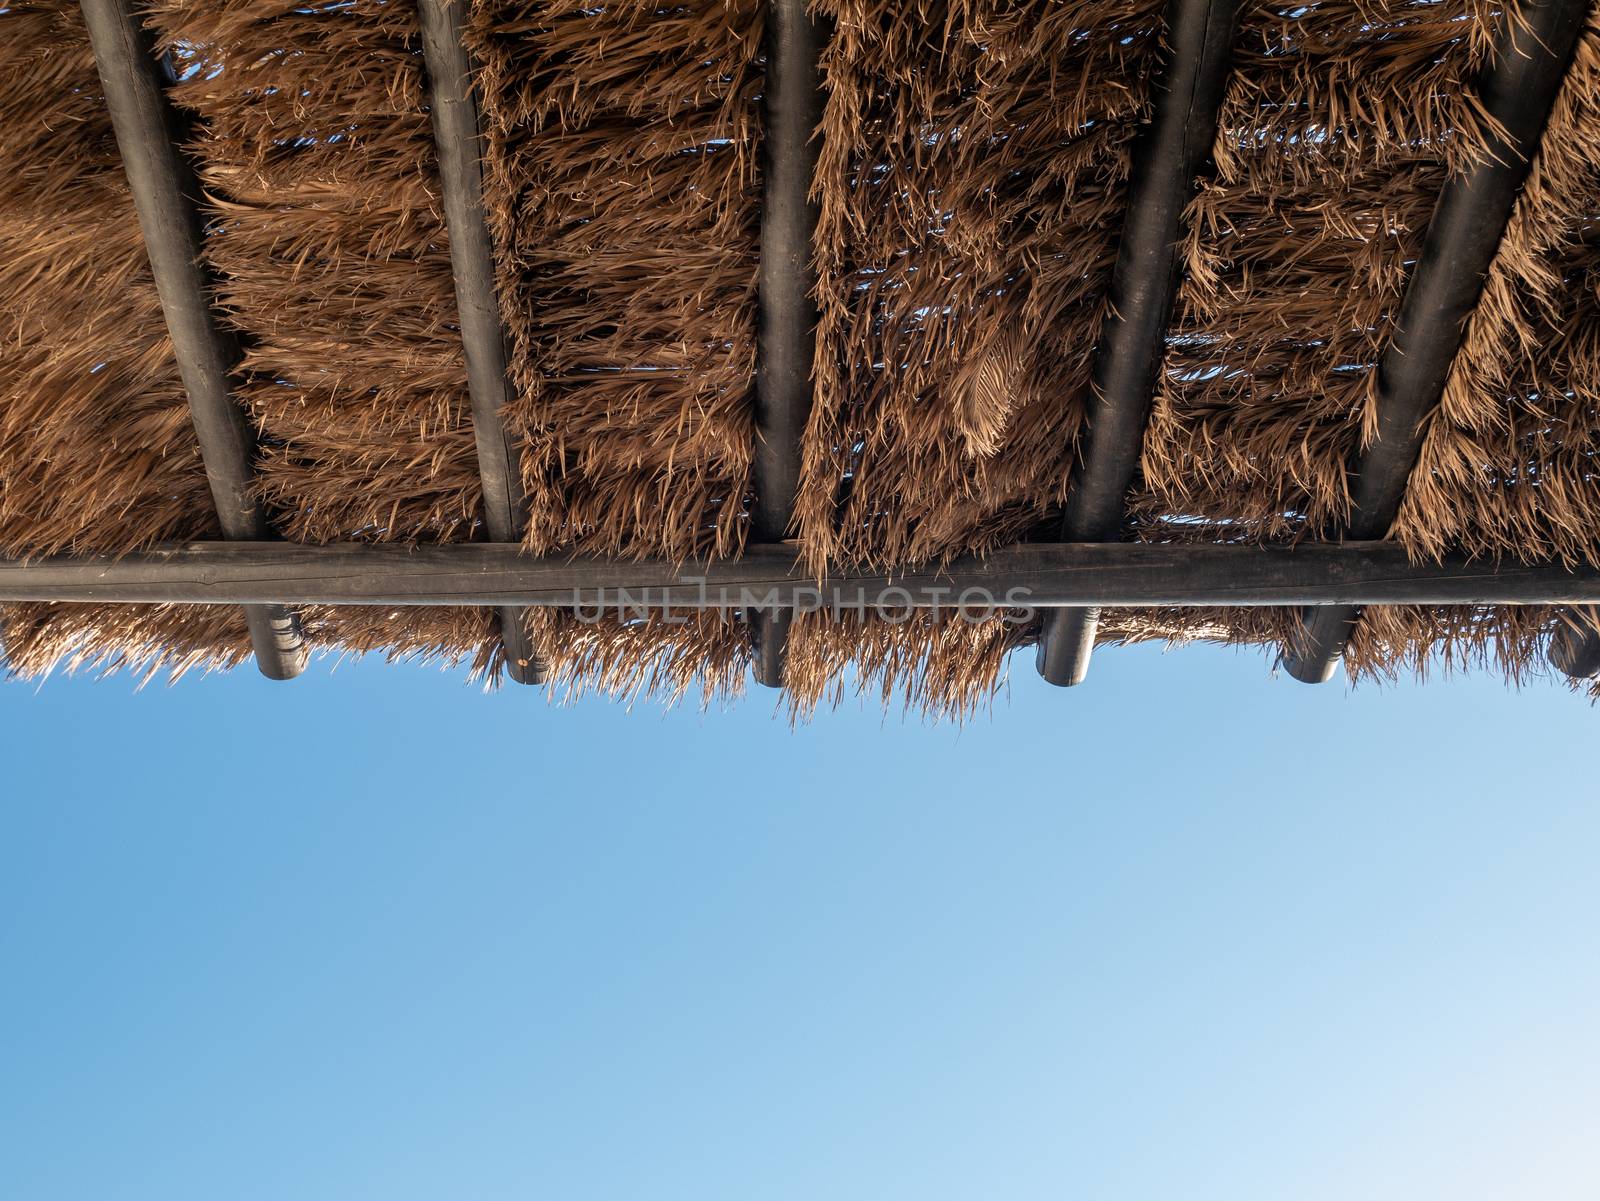 Tropical coconut palm tree leaf pavilion roof with blue sky. by Amankris